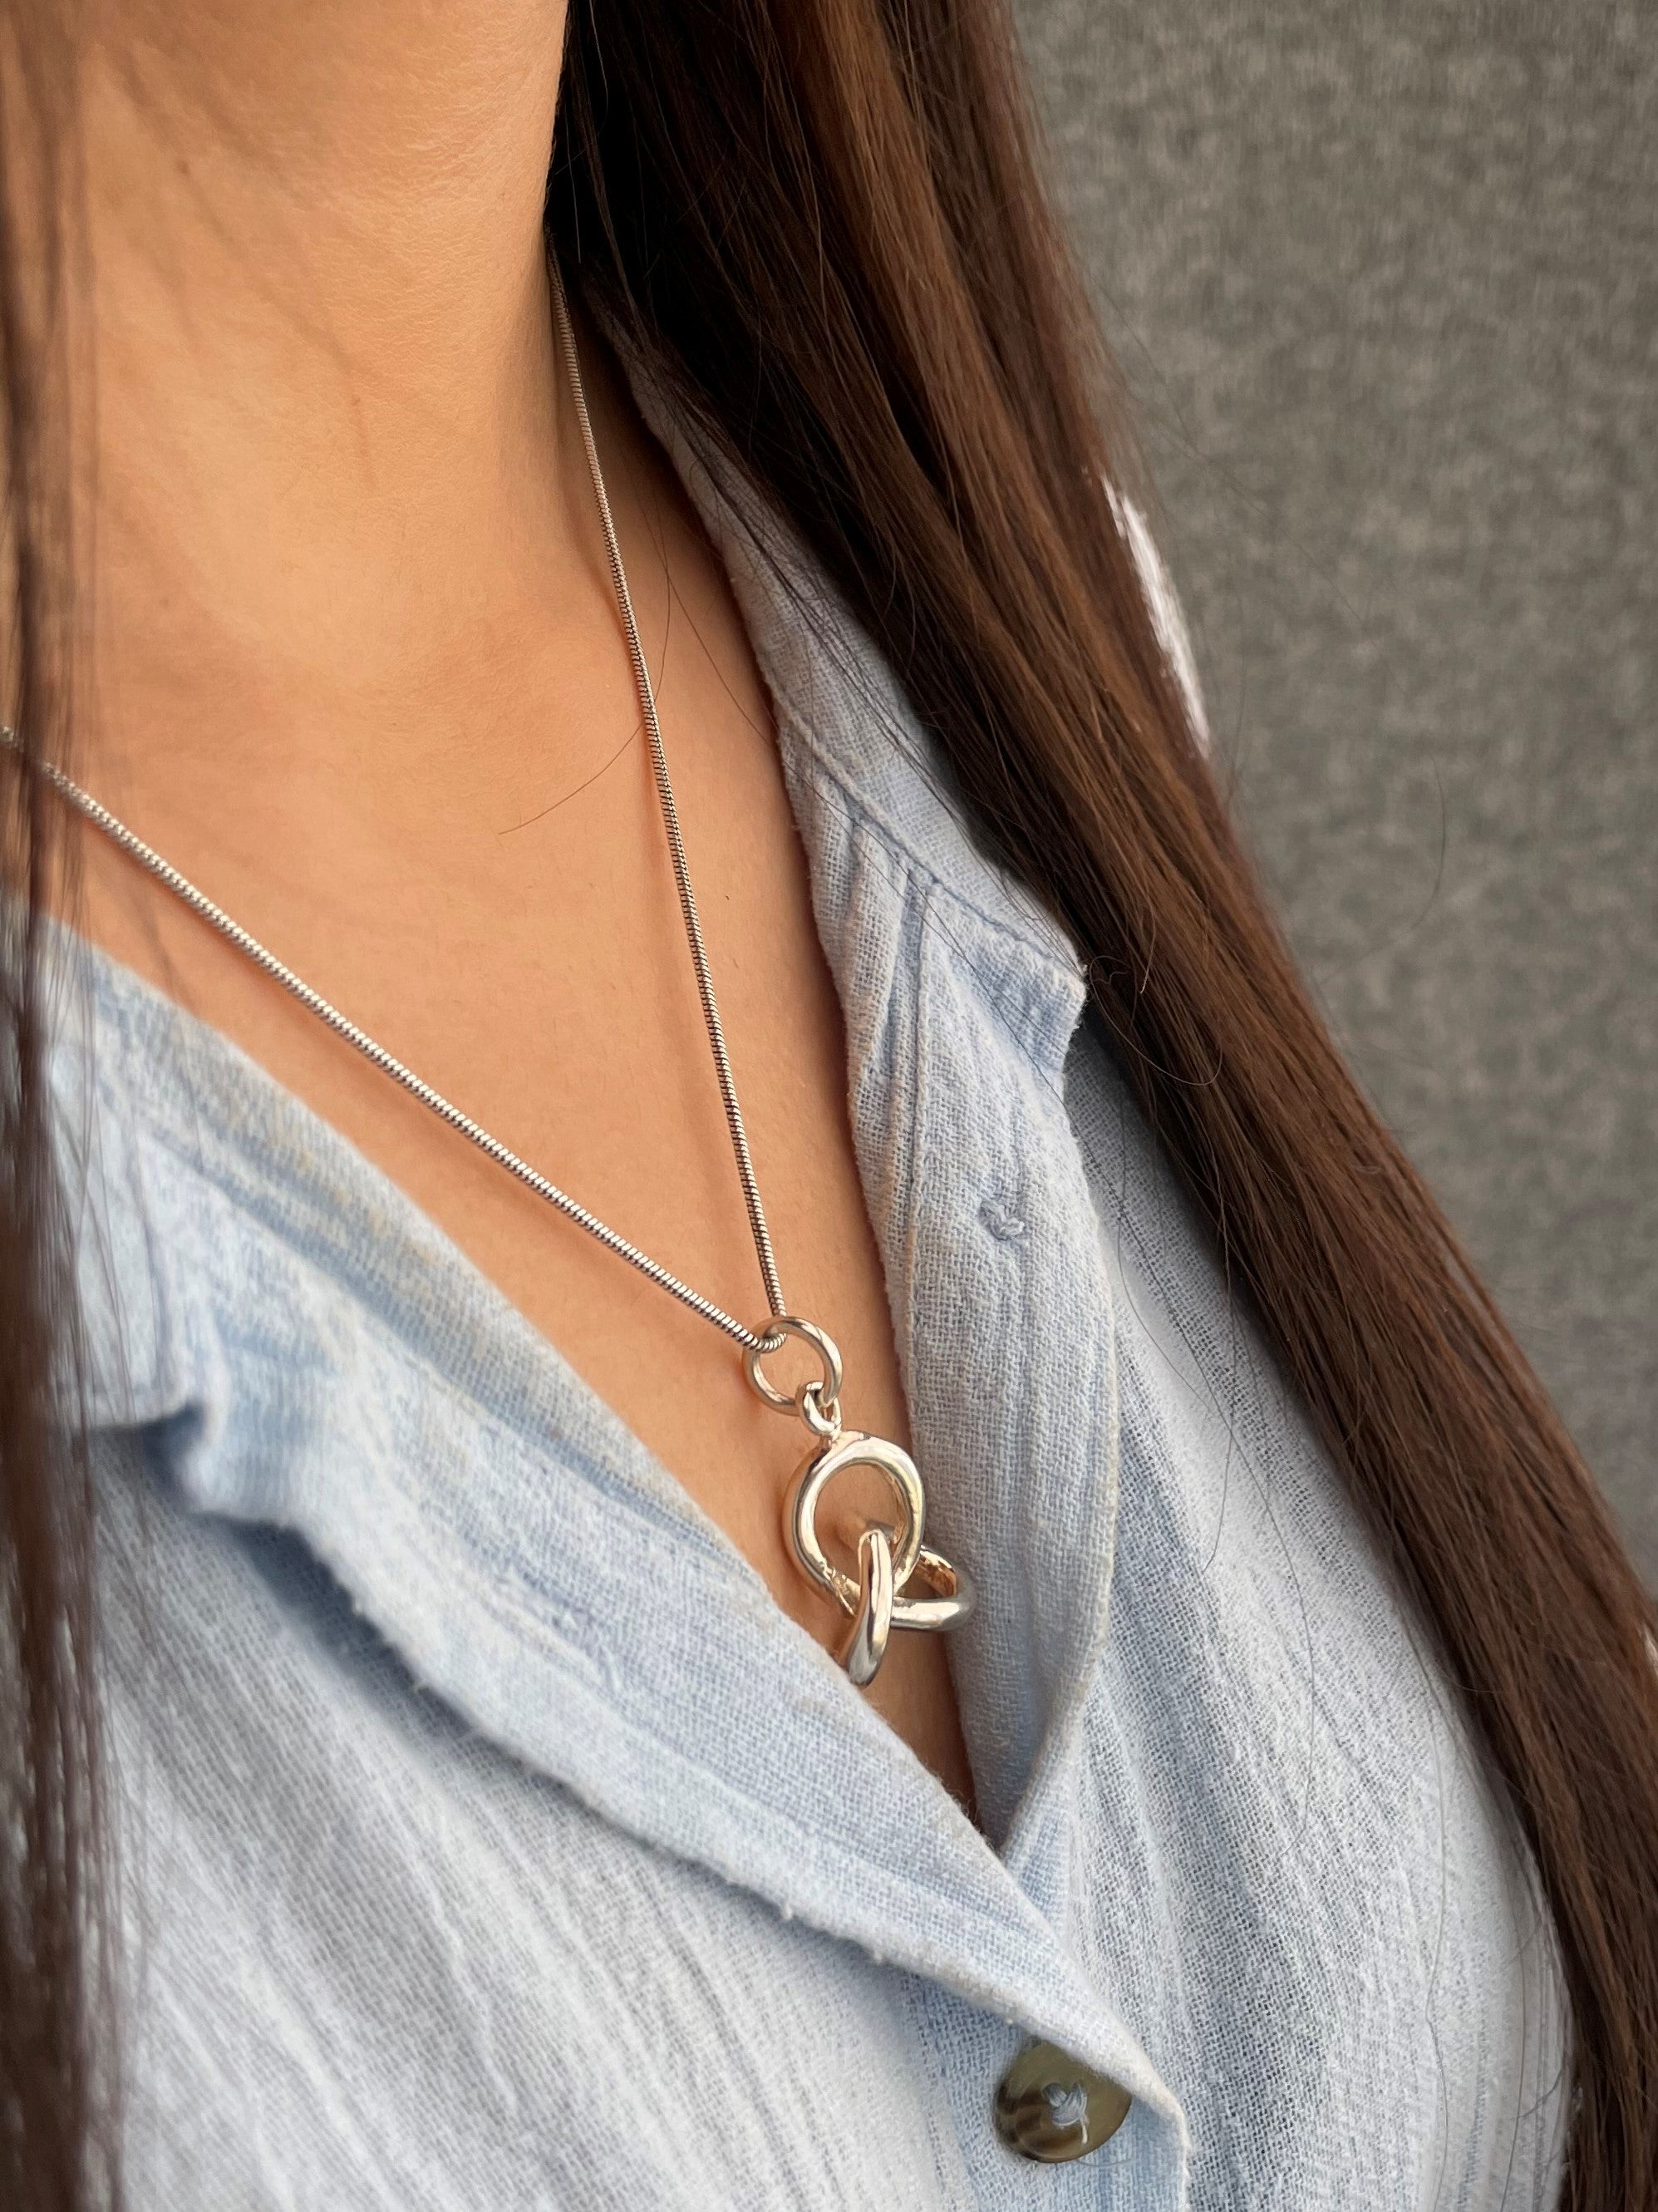 Sterling Silver Infinity Pendant Necklace